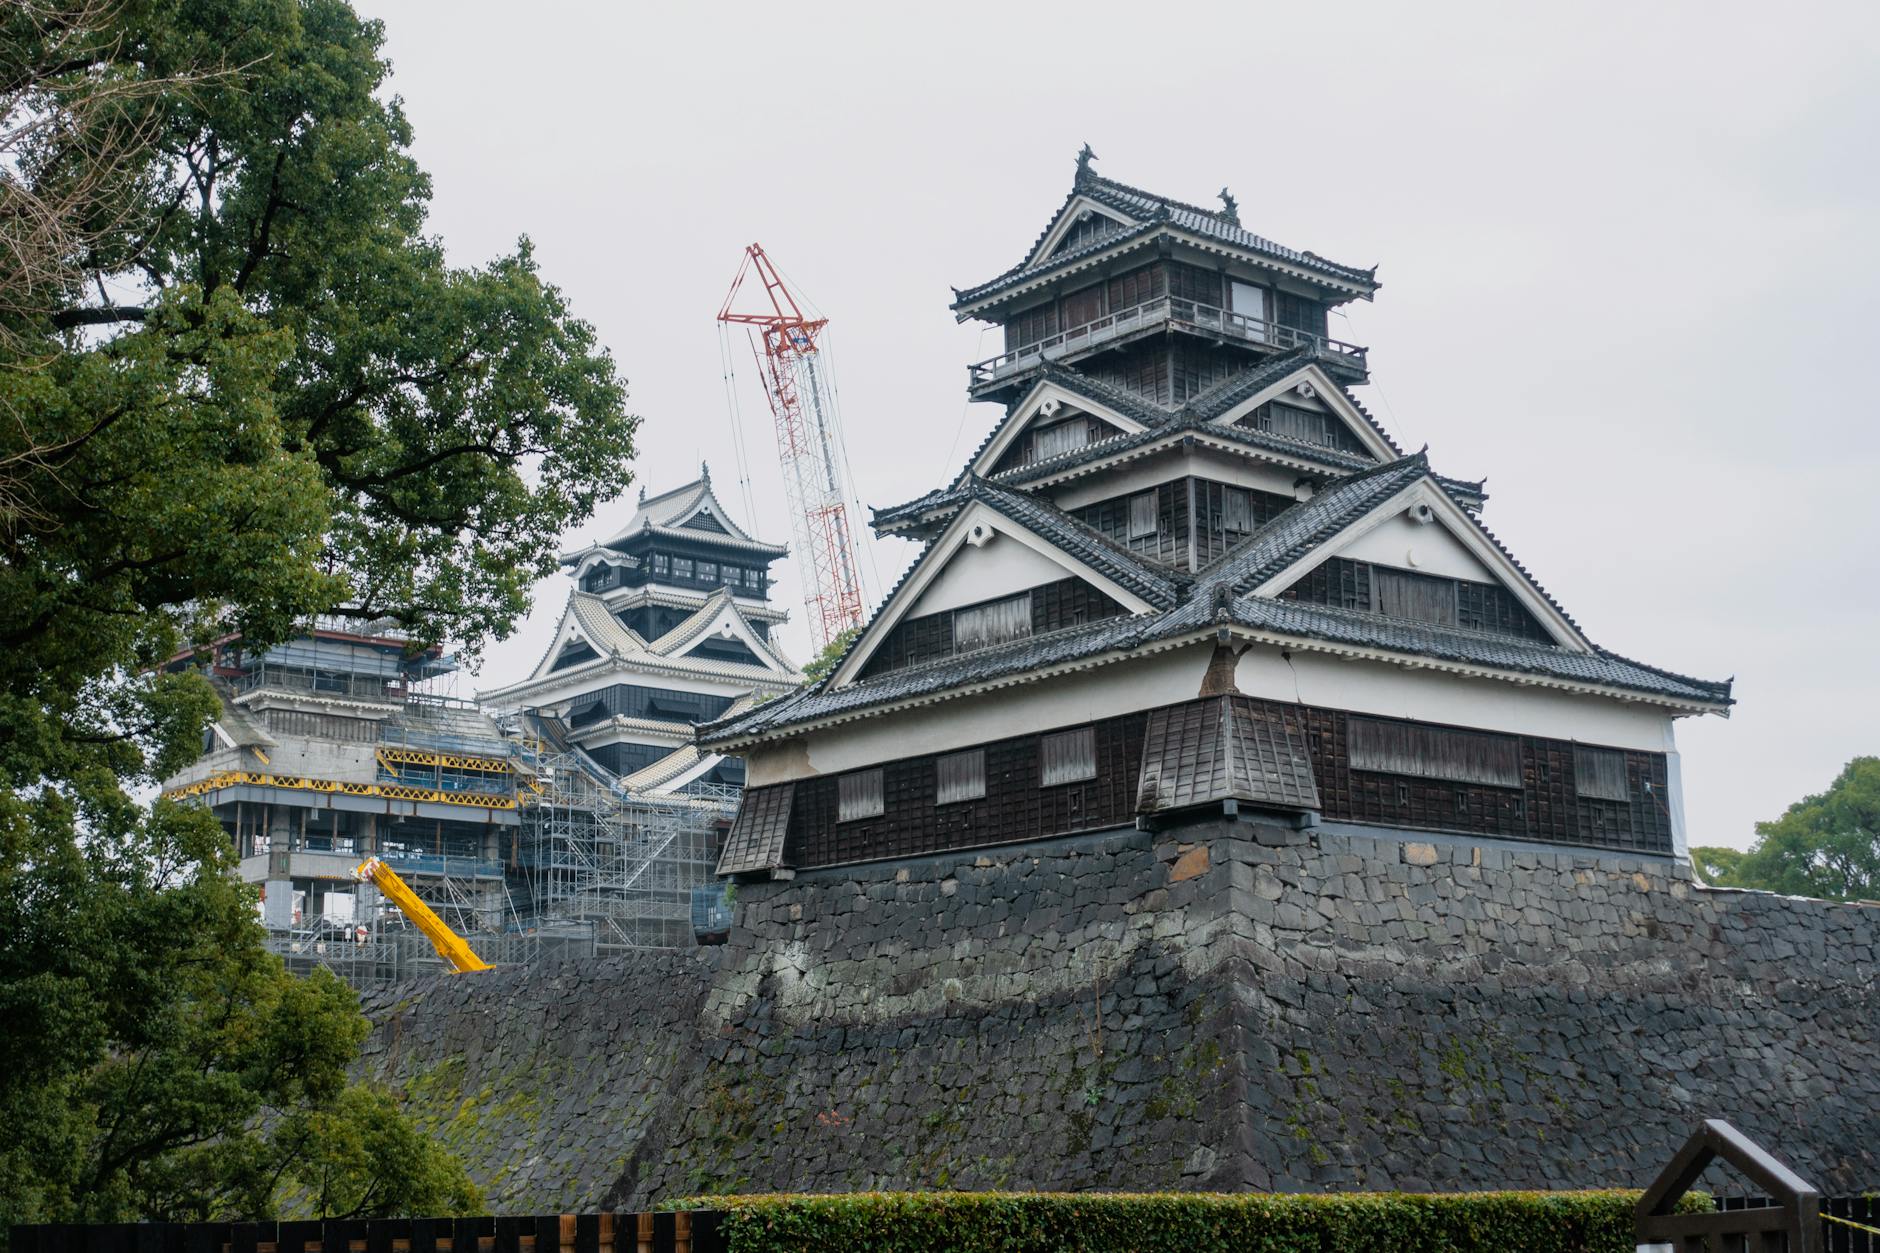 Reconstruction of a Japanese Castle